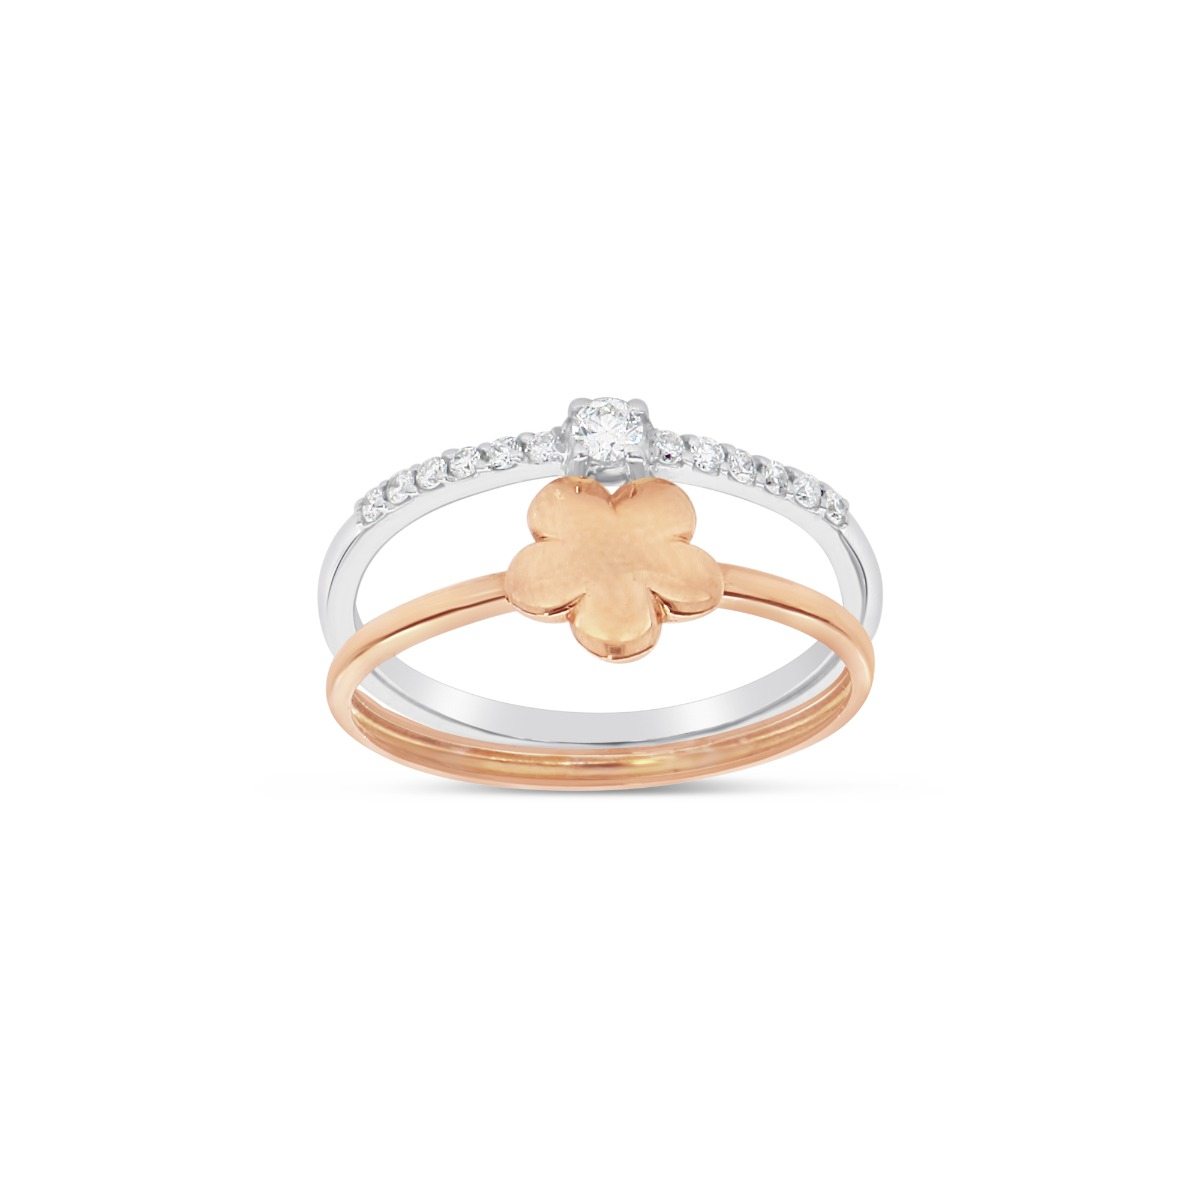 Double Band Single Flower Ring in 18K White and Rose Gold with Diamonds - 